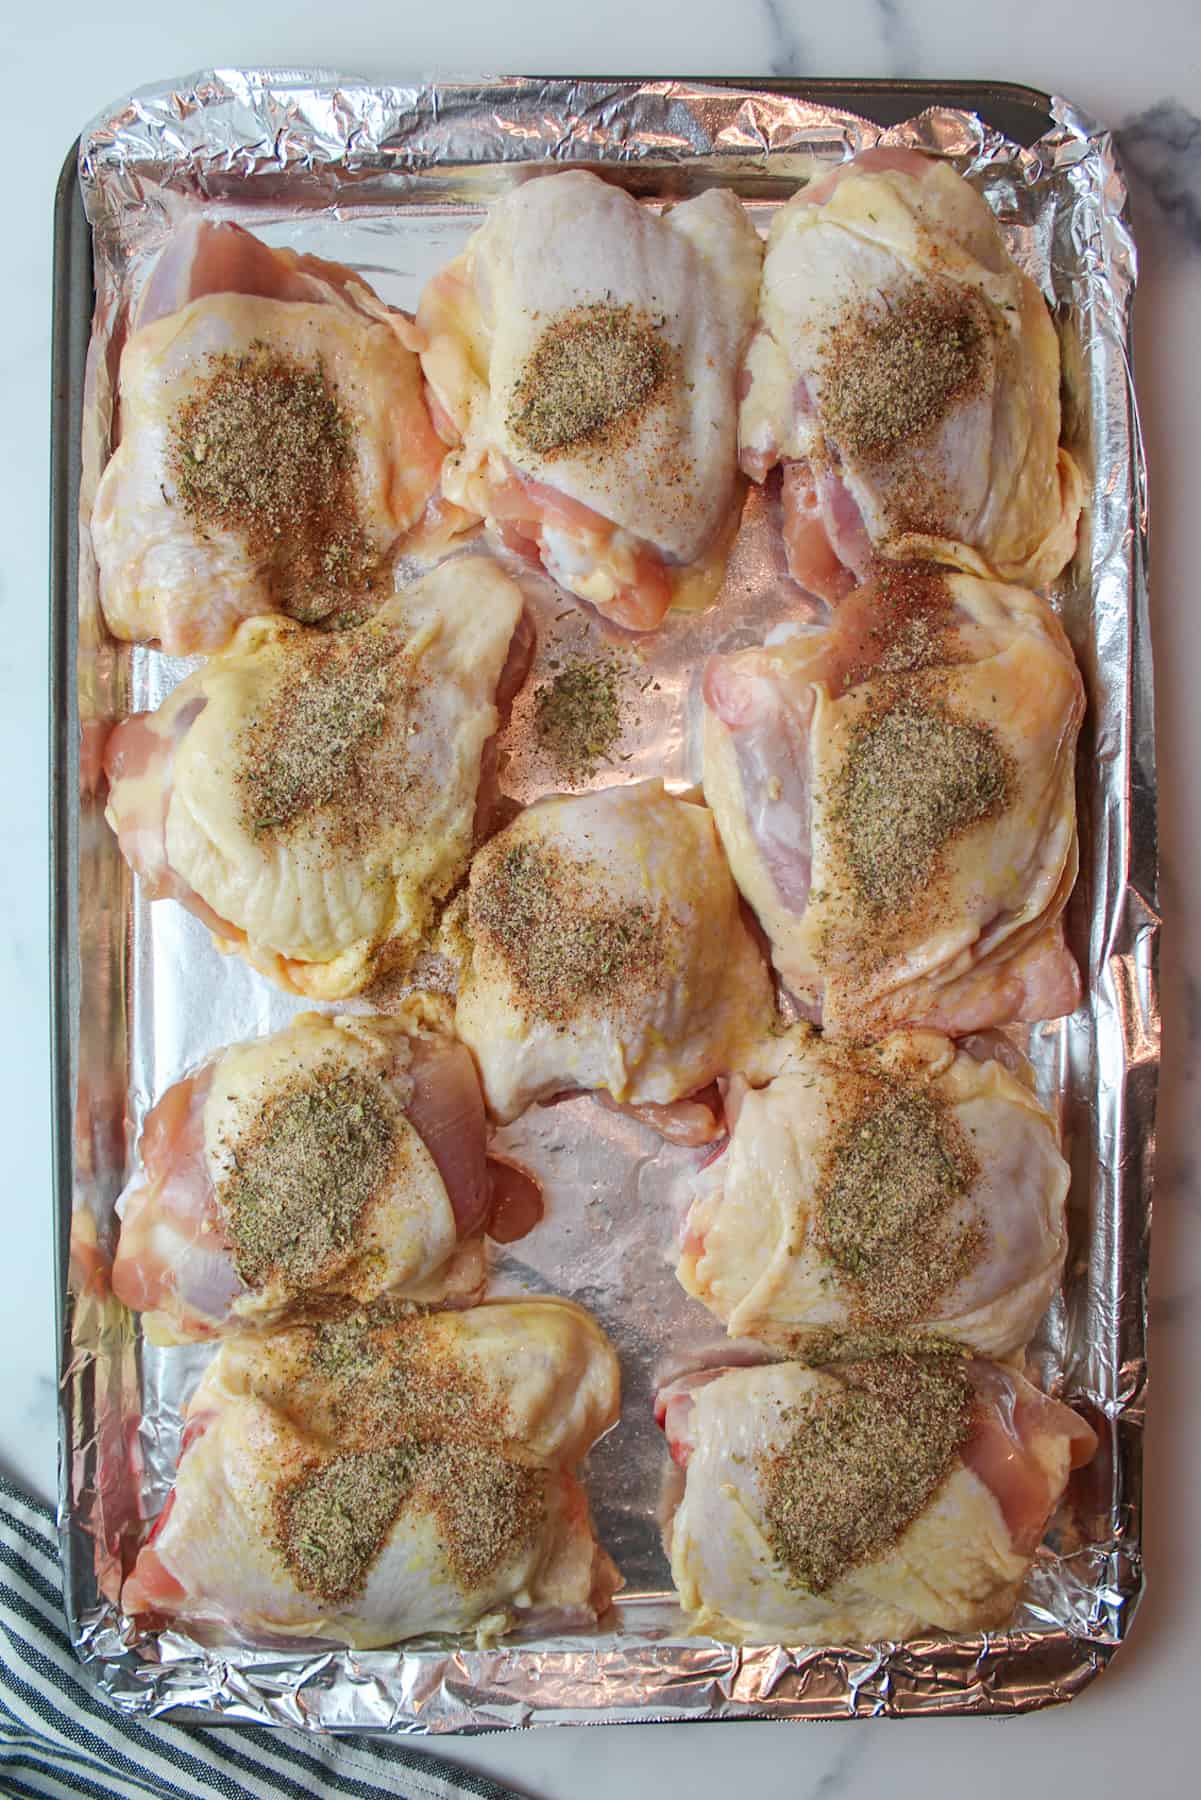 sprinkled mixed seasonings over chicken thighs on a foil lined baking sheet.